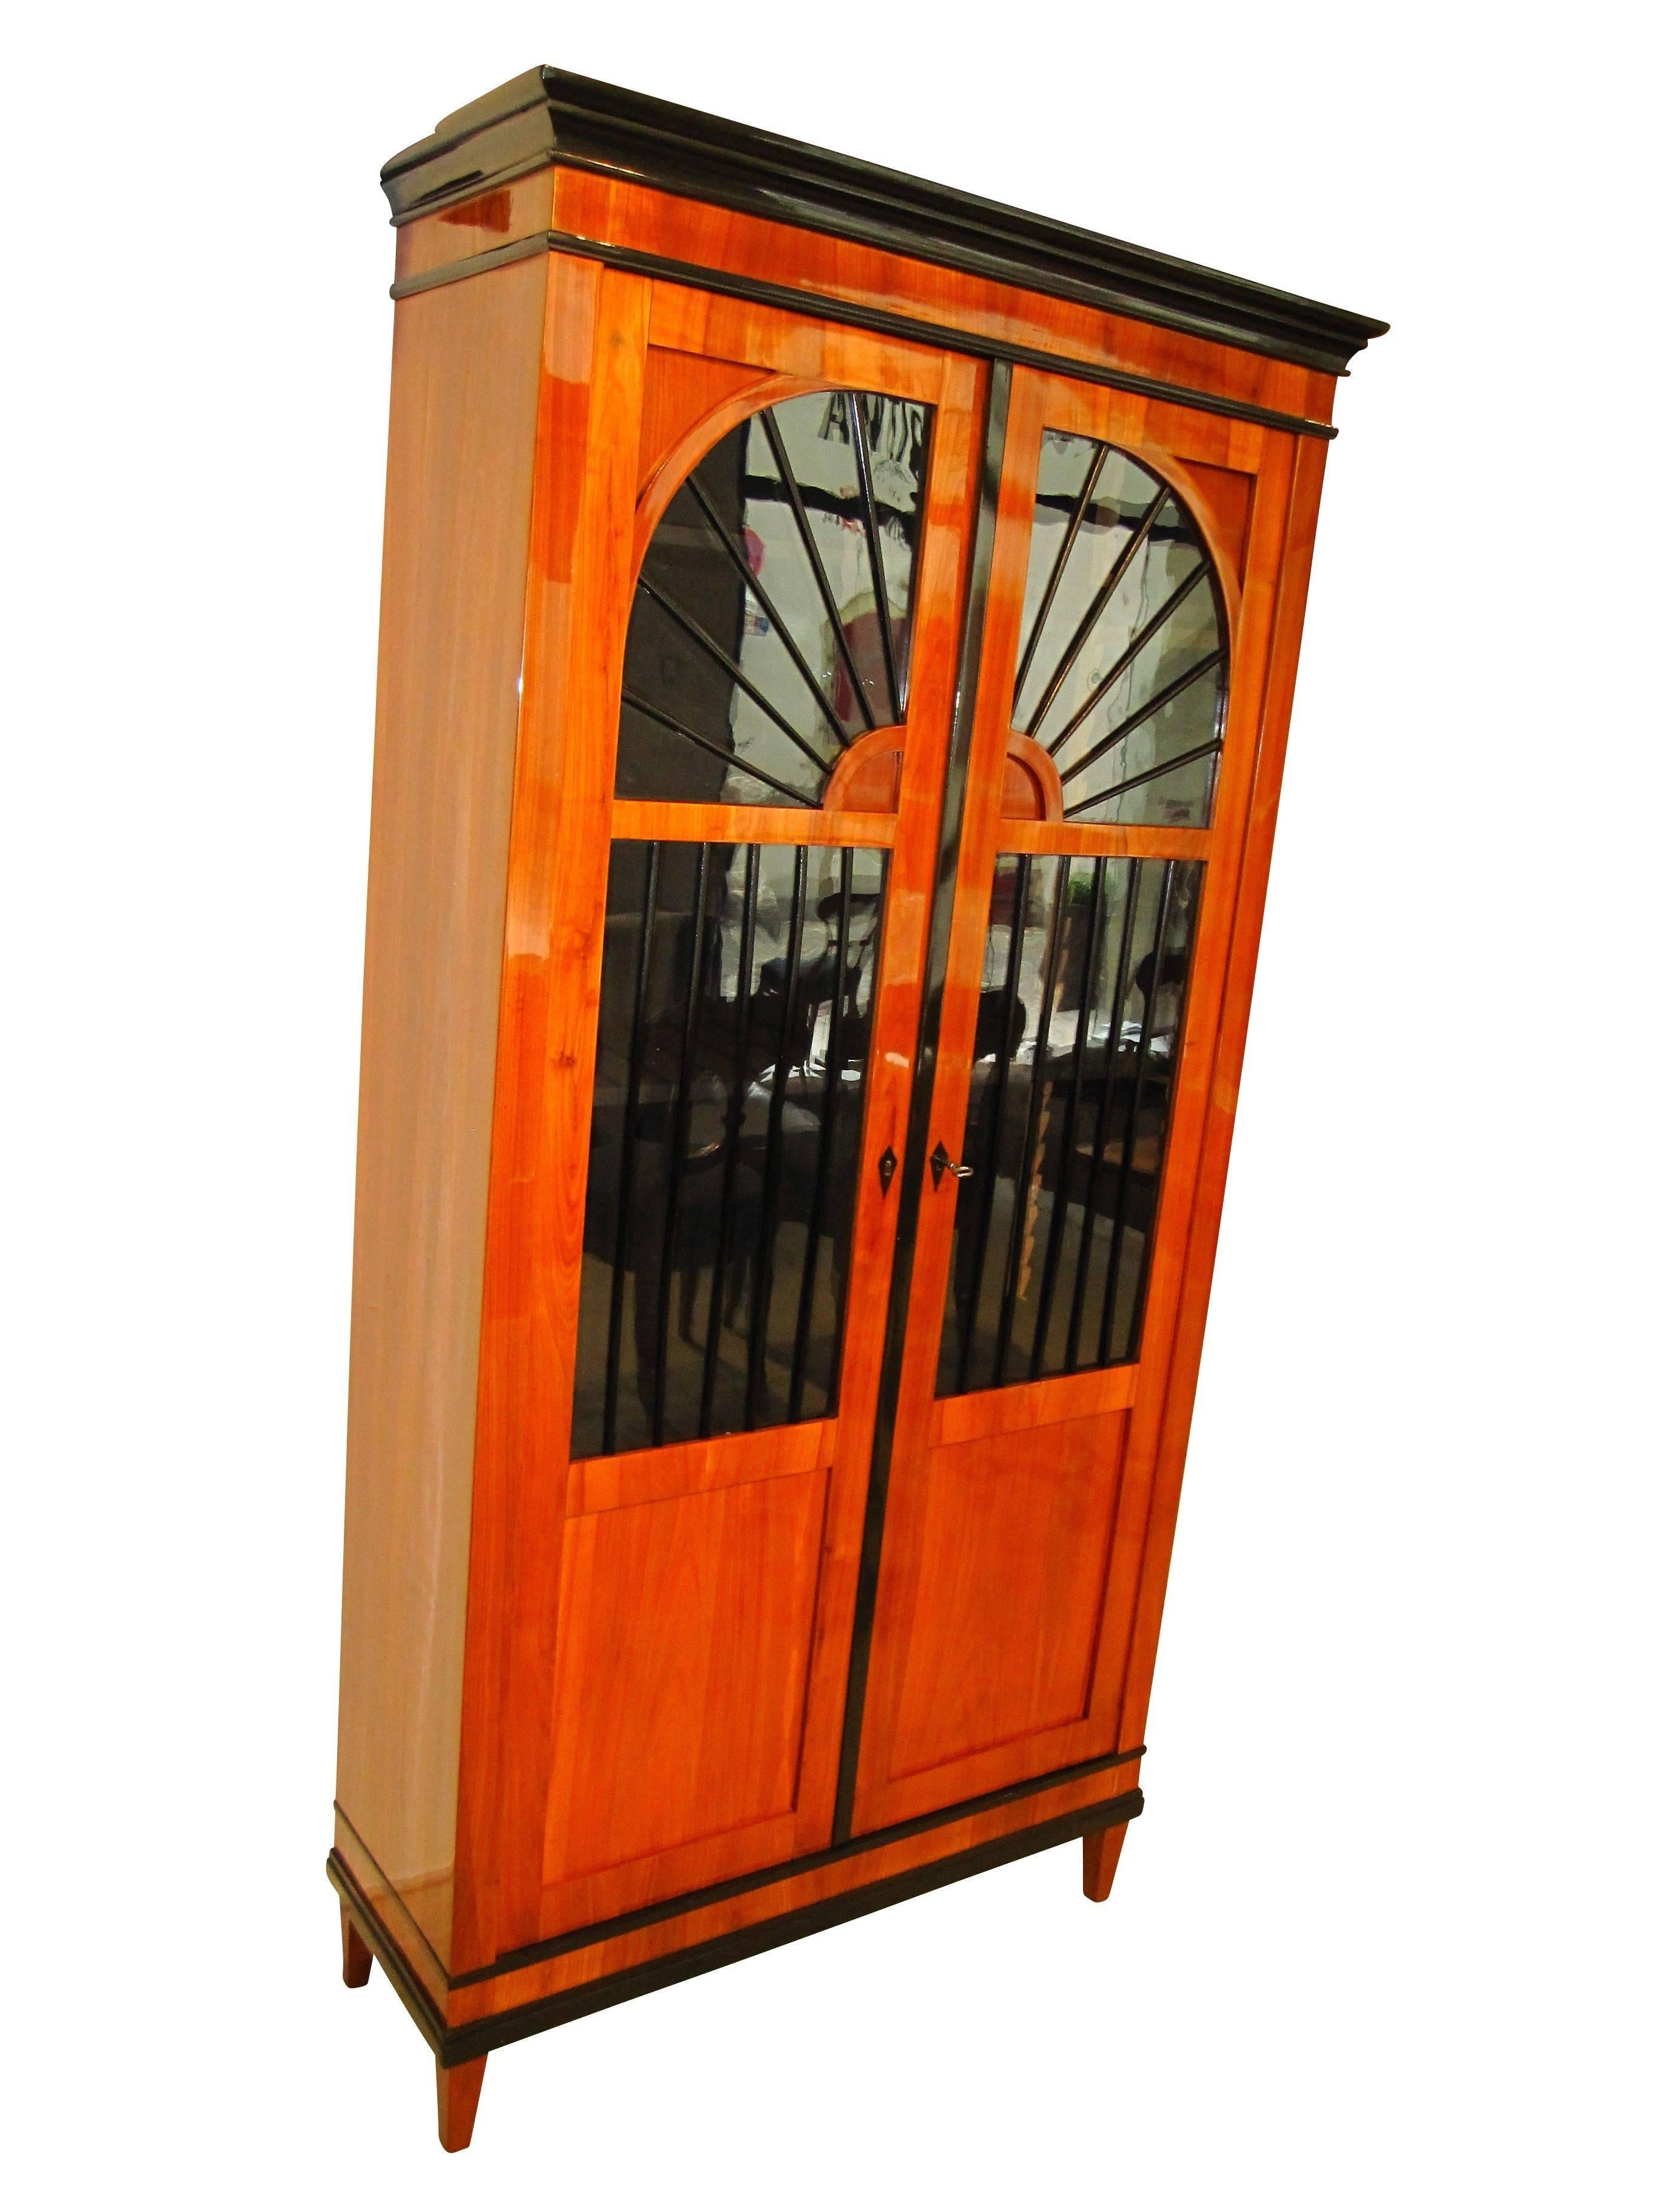 Wonderful and very elegant early Biedermeier vitrine, bookcase or display case.
It has a lovely cherry veneer and solid wood with ebonized glazing bars. The low width makes the furniture seem very light and not dominant in the room.

The bookcase